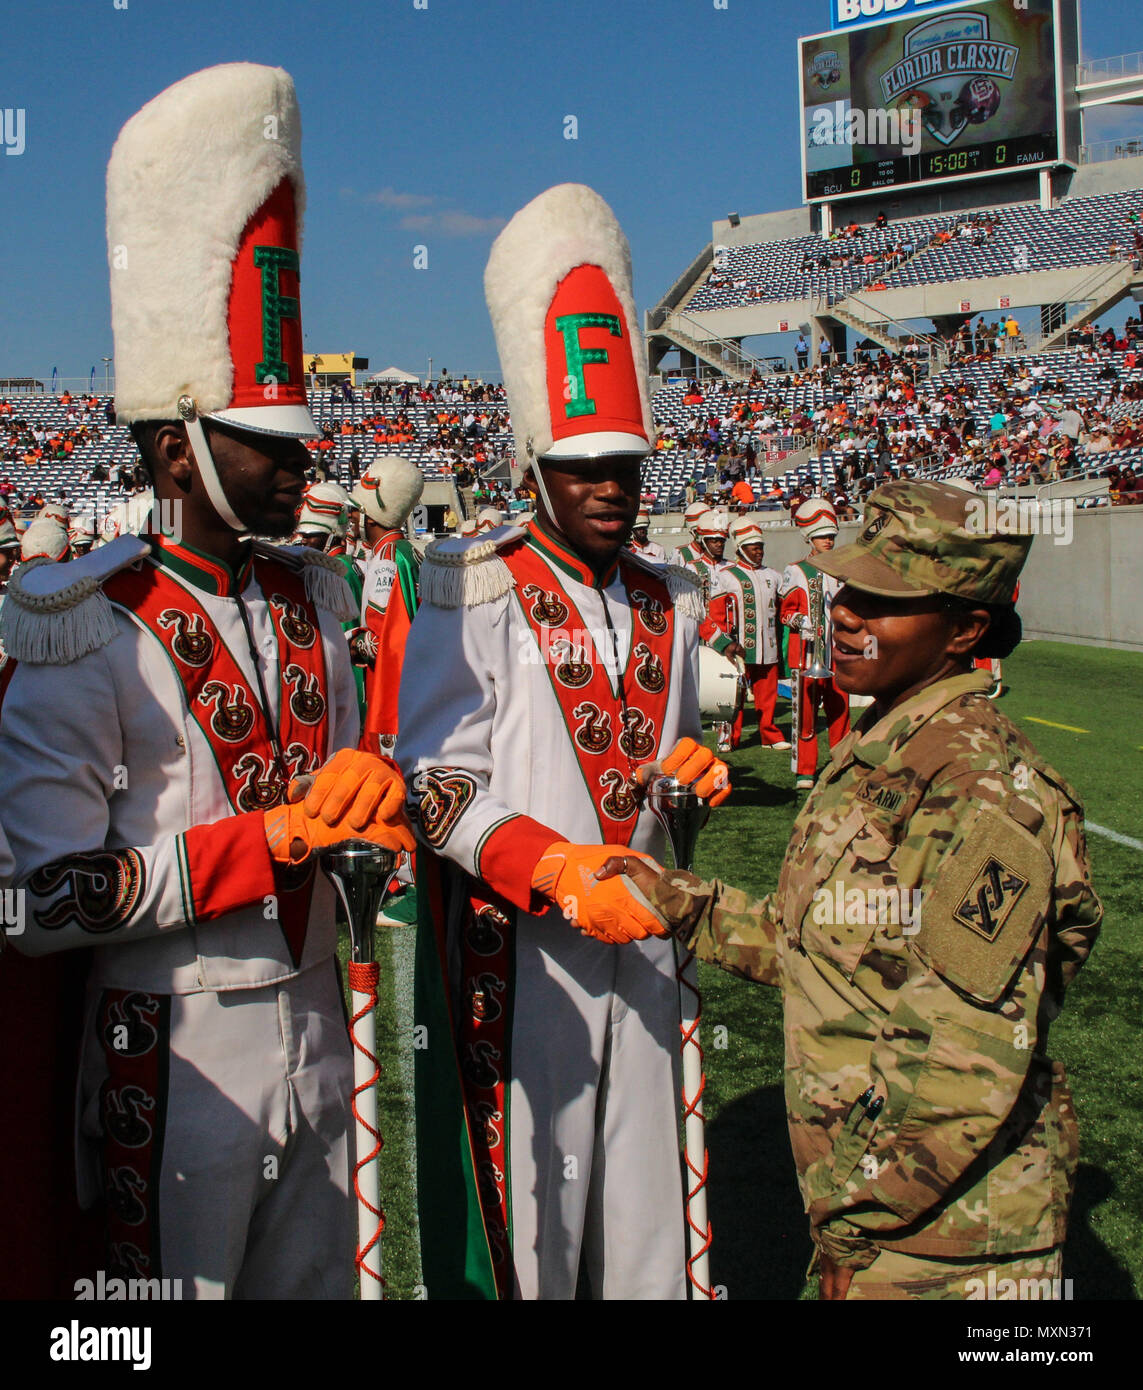 Minutes before the opening kickoff of the 2016 Florida Classic, Army Master Sgt. Shantell D. Aviles, noncommissioned officer-in-charge, Office of the Inspector General, 143d Sustainment Command (Expeditionary), shakes hands with two drum majors from the Florida A&M University marching band Nov. 19, 2016, at Camping World Stadium in Orlando, Fla. Aviles, a native of Rockledge, Fla., grew up watching the Florida Classic. Although she and her family are no strangers to seeing the game from the stands, Aviles had never before set foot on the sidelines. With a smile never left her face, she took fu Stock Photo